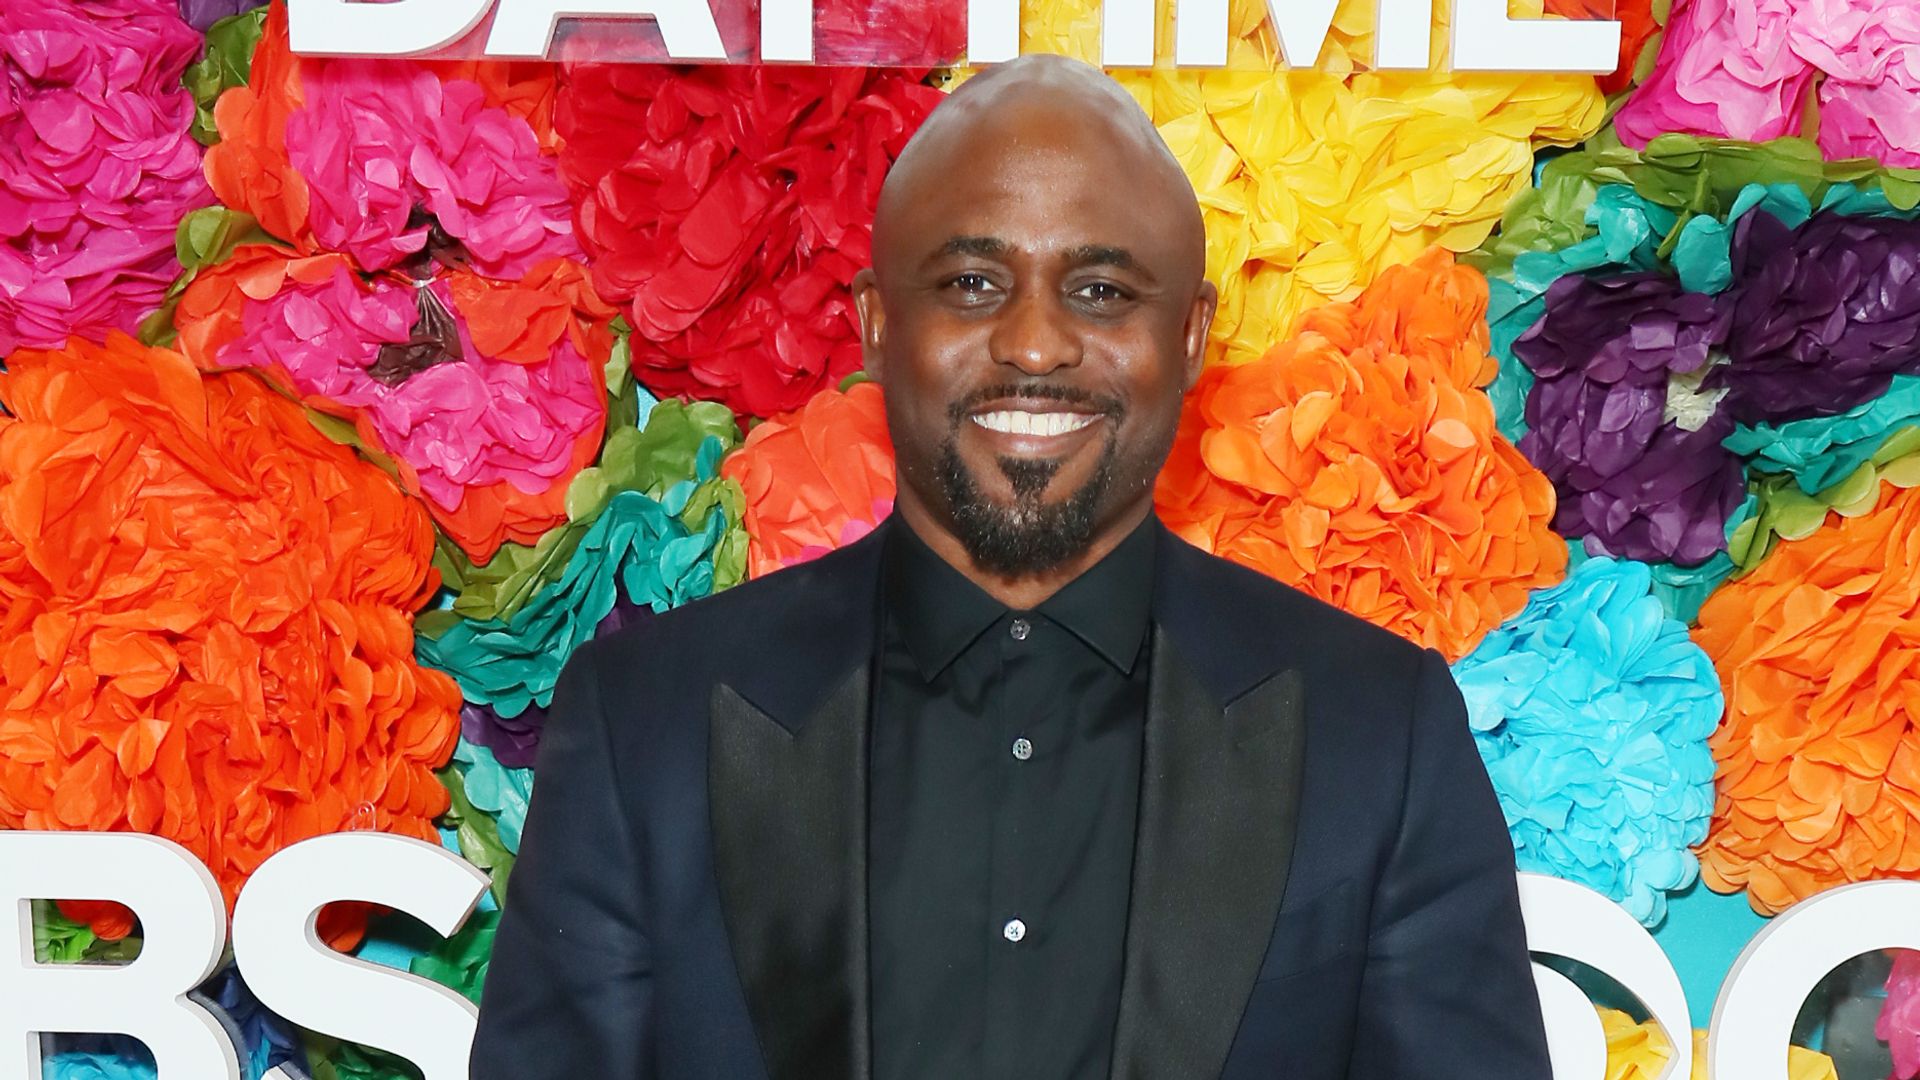 Wayne Brady attends CBS Daytime Emmy Awards After Party at Pasadena Convention Center on May 05, 2019 in Pasadena, California